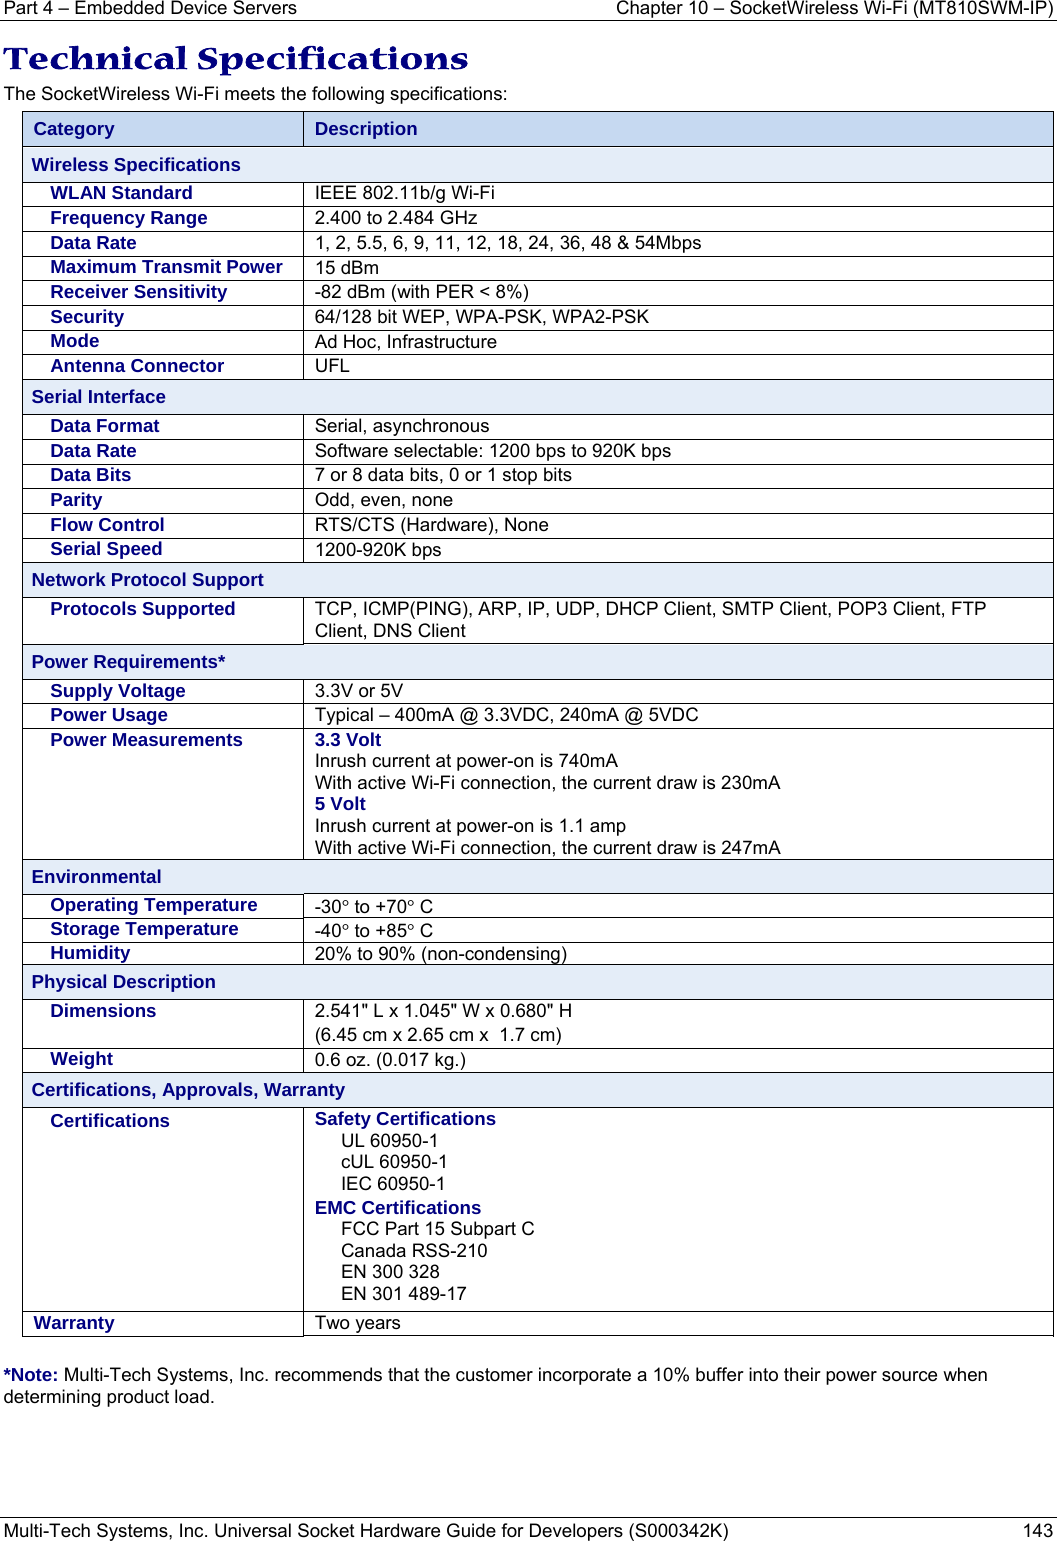 Part 4 – Embedded Device Servers  Chapter 10 – SocketWireless Wi-Fi (MT810SWM-IP) Multi-Tech Systems, Inc. Universal Socket Hardware Guide for Developers (S000342K)  143  Technical Specifications The SocketWireless Wi-Fi meets the following specifications:  Category  Description Wireless Specifications WLAN Standard  IEEE 802.11b/g Wi-Fi  Frequency Range  2.400 to 2.484 GHz Data Rate  1, 2, 5.5, 6, 9, 11, 12, 18, 24, 36, 48 &amp; 54Mbps Maximum Transmit Power 15 dBm Receiver Sensitivity  -82 dBm (with PER &lt; 8%) Security  64/128 bit WEP, WPA-PSK, WPA2-PSK  Mode  Ad Hoc, Infrastructure Antenna Connector UFL Serial Interface Data Format  Serial, asynchronous Data Rate  Software selectable: 1200 bps to 920K bps Data Bits  7 or 8 data bits, 0 or 1 stop bits Parity  Odd, even, none Flow Control  RTS/CTS (Hardware), None Serial Speed  1200-920K bps Network Protocol Support Protocols Supported  TCP, ICMP(PING), ARP, IP, UDP, DHCP Client, SMTP Client, POP3 Client, FTP Client, DNS Client Power Requirements* Supply Voltage  3.3V or 5V Power Usage  Typical – 400mA @ 3.3VDC, 240mA @ 5VDC Power Measurements  3.3 Volt Inrush current at power-on is 740mA With active Wi-Fi connection, the current draw is 230mA   5 Volt Inrush current at power-on is 1.1 amp With active Wi-Fi connection, the current draw is 247mA                        Environmental Operating Temperature  -30° to +70° C  Storage Temperature  -40° to +85° C Humidity  20% to 90% (non-condensing)    Physical Description Dimensions  2.541&quot; L x 1.045&quot; W x 0.680&quot; H (6.45 cm x 2.65 cm x  1.7 cm) Weight  0.6 oz. (0.017 kg.) Certifications, Approvals, Warranty Certifications  Safety CertificationsUL 60950-1 cUL 60950-1 IEC 60950-1 EMC Certifications FCC Part 15 Subpart C Canada RSS-210 EN 300 328 EN 301 489-17 Warranty  Two years  *Note: Multi-Tech Systems, Inc. recommends that the customer incorporate a 10% buffer into their power source when determining product load.    